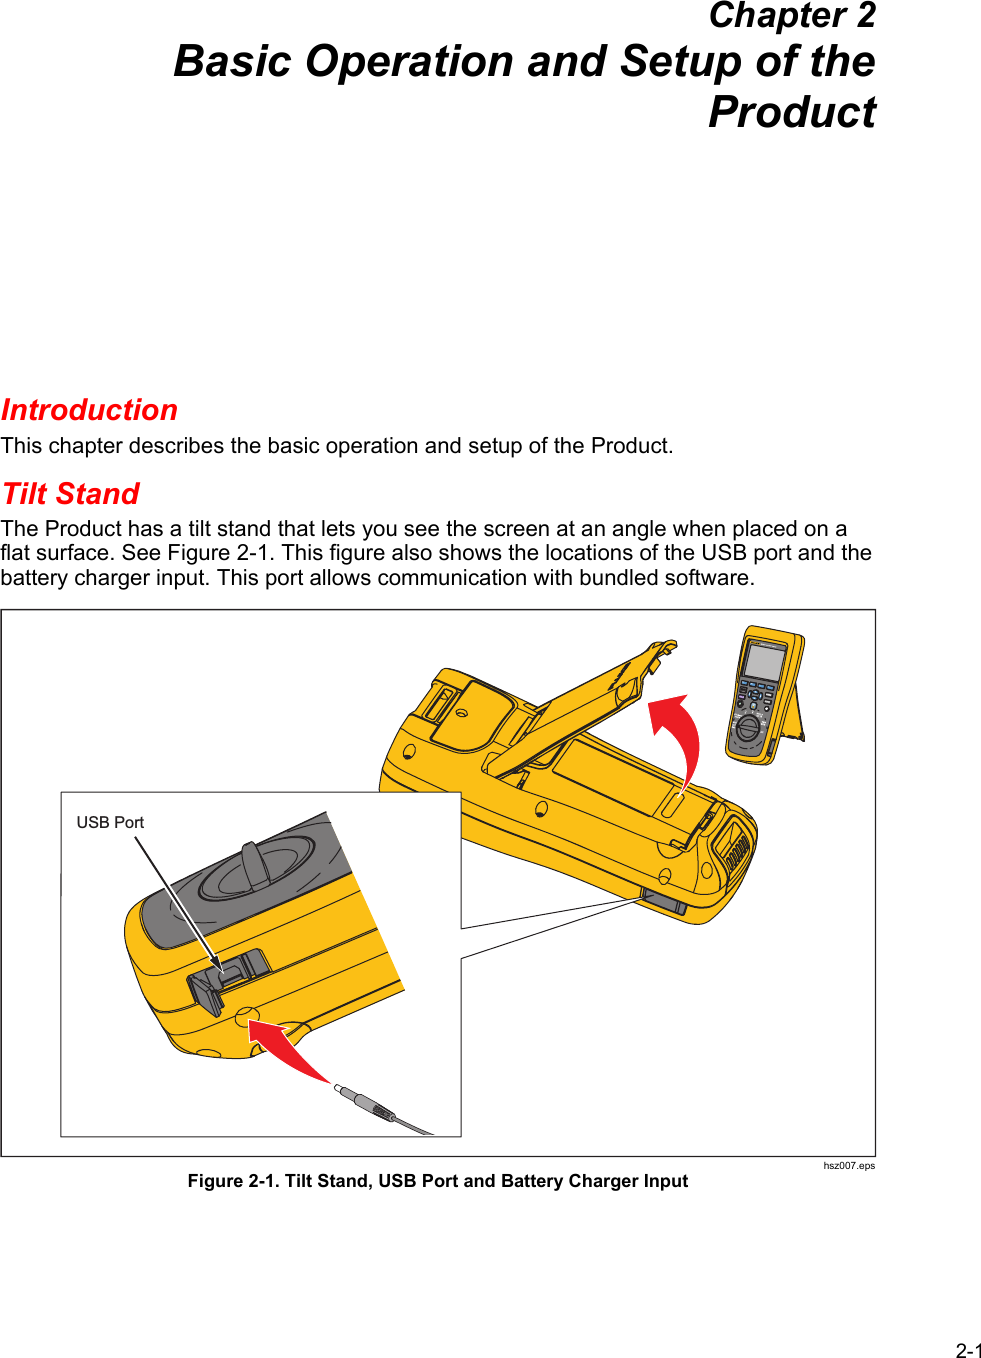 2-1 Chapter 2 Basic Operation and Setup of the Product Introduction This chapter describes the basic operation and setup of the Product. Tilt Stand The Product has a tilt stand that lets you see the screen at an angle when placed on a flat surface. See Figure 2-1. This figure also shows the locations of the USB port and the battery charger input. This port allows communication with bundled software. USB Port hsz007.eps Figure 2-1. Tilt Stand, USB Port and Battery Charger Input 